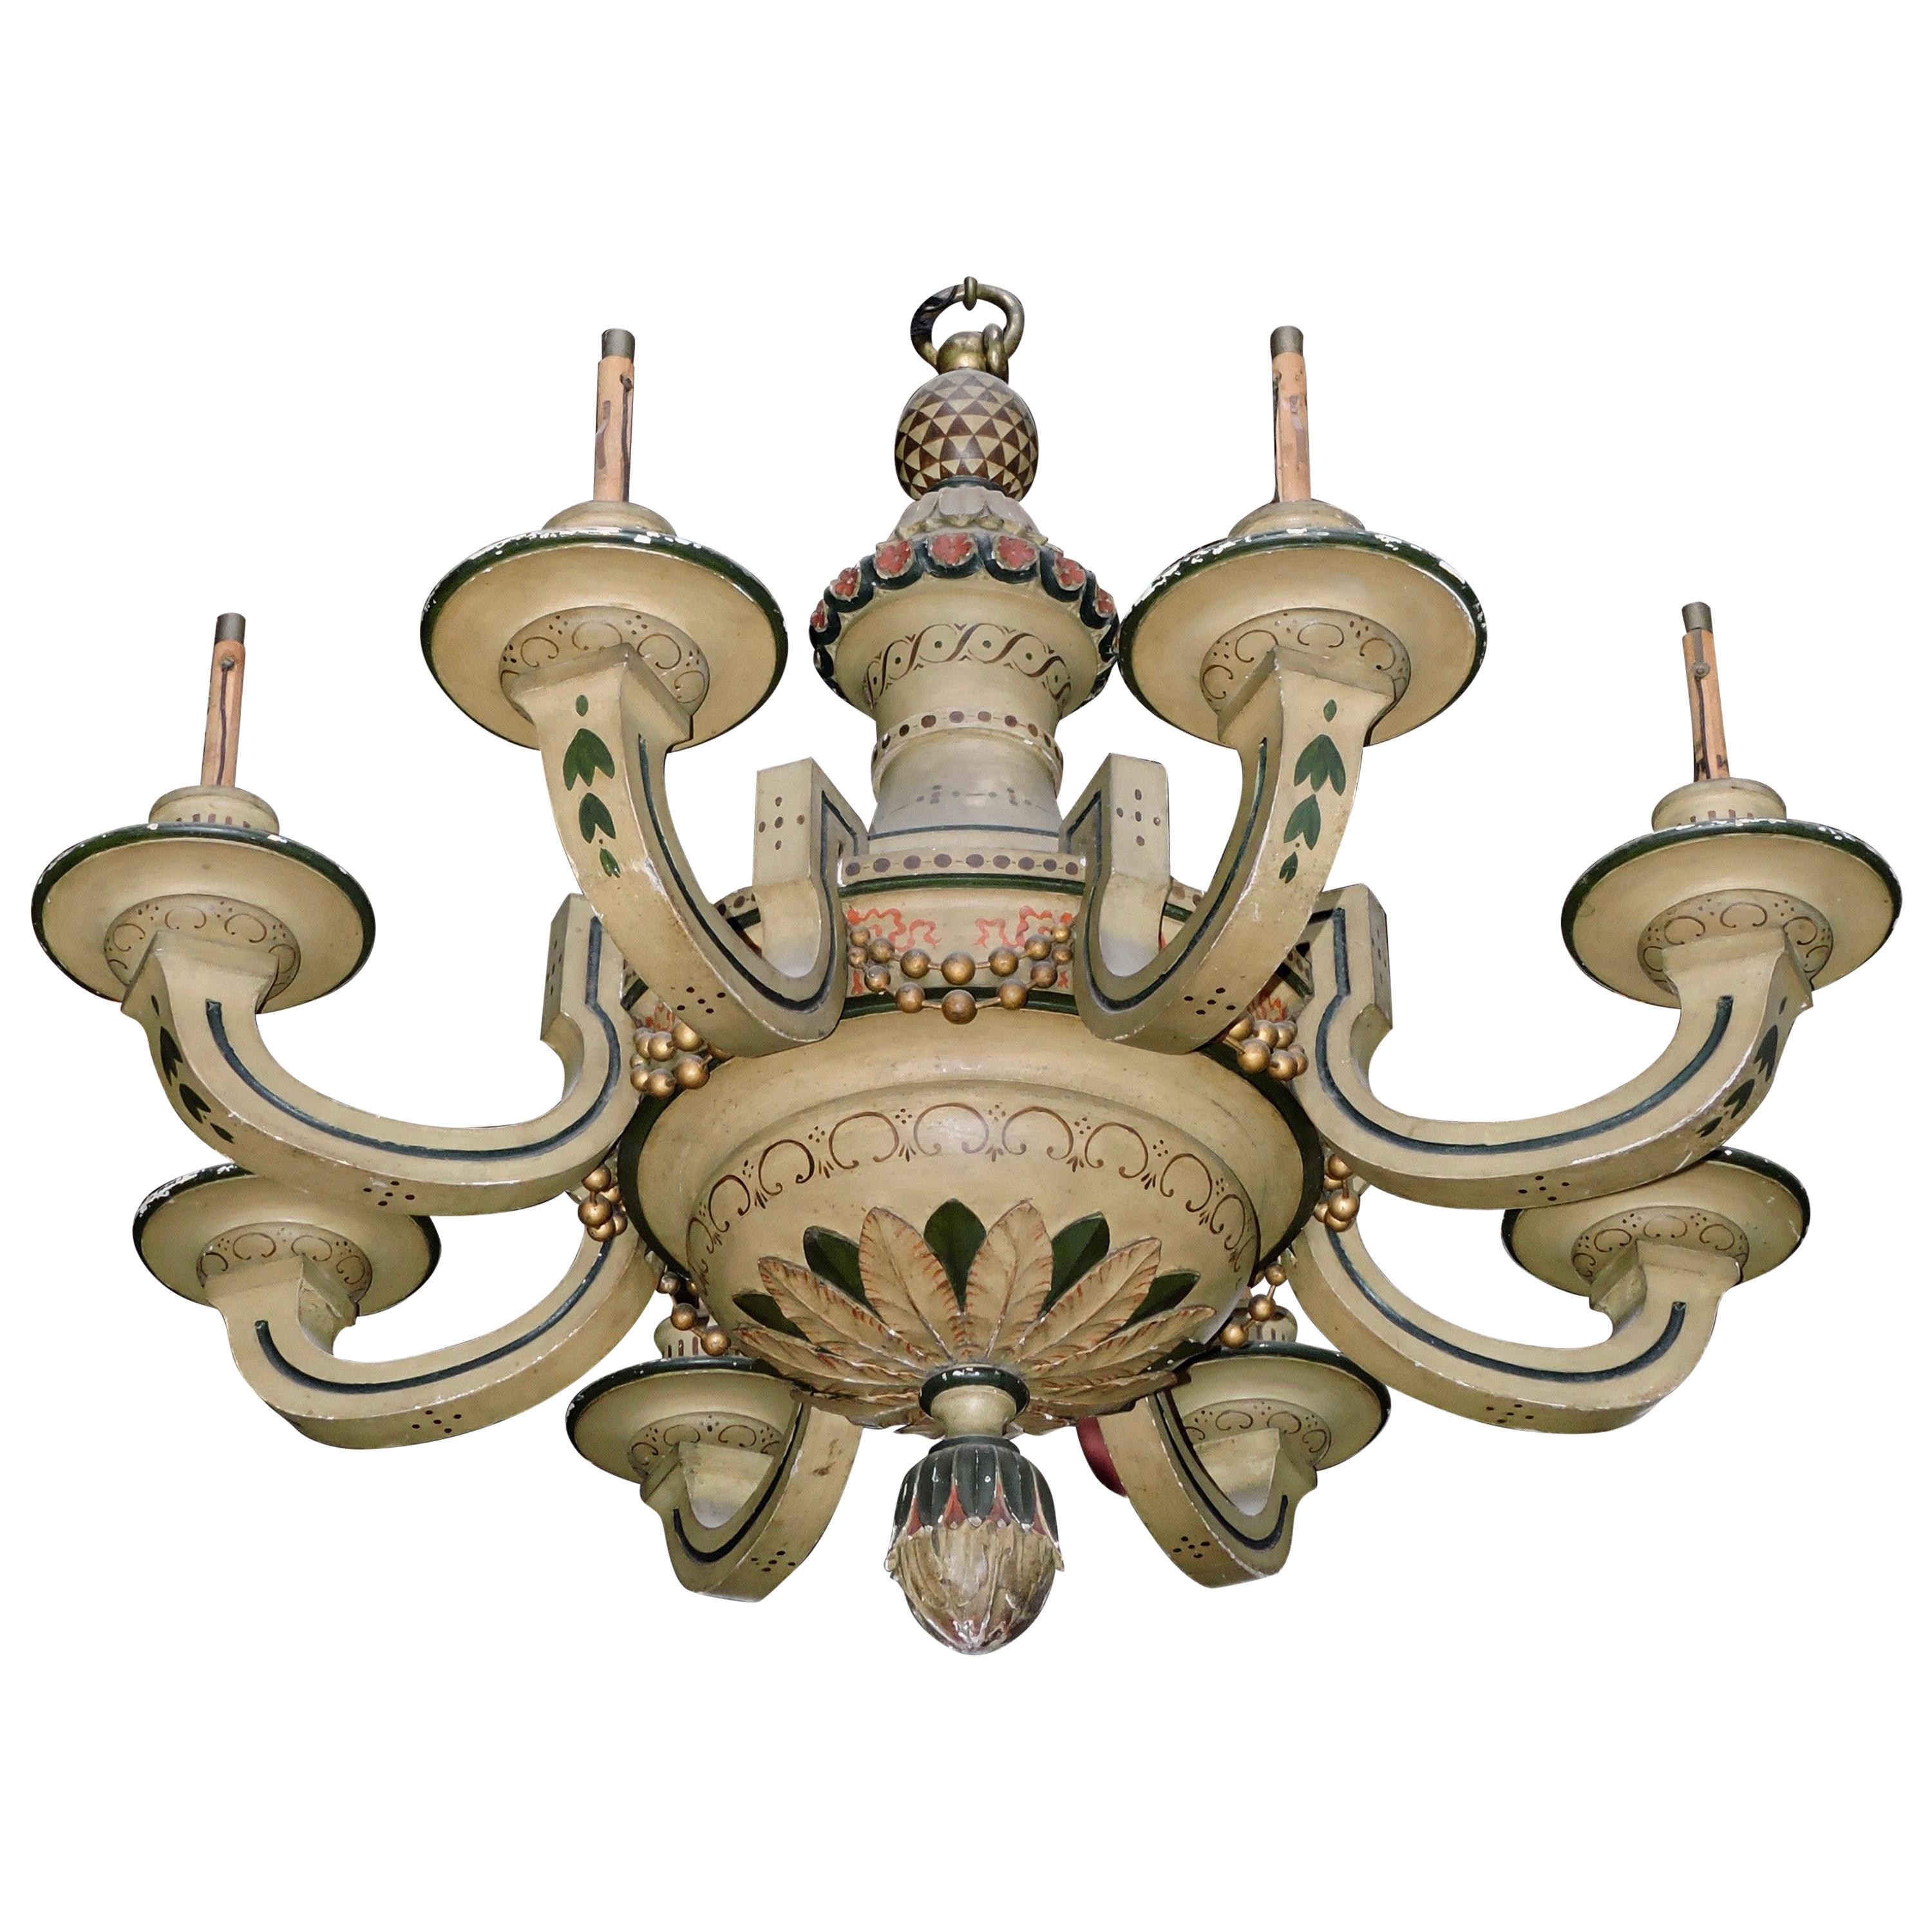 A 19th century French polychromed lacquered wood eight-light chandelier

Lacquered gloss cream wood with green, red and brown highlights
Contained vase ending in foliated seed welcoming eight arms forming semicircles.
The top has a frieze of red